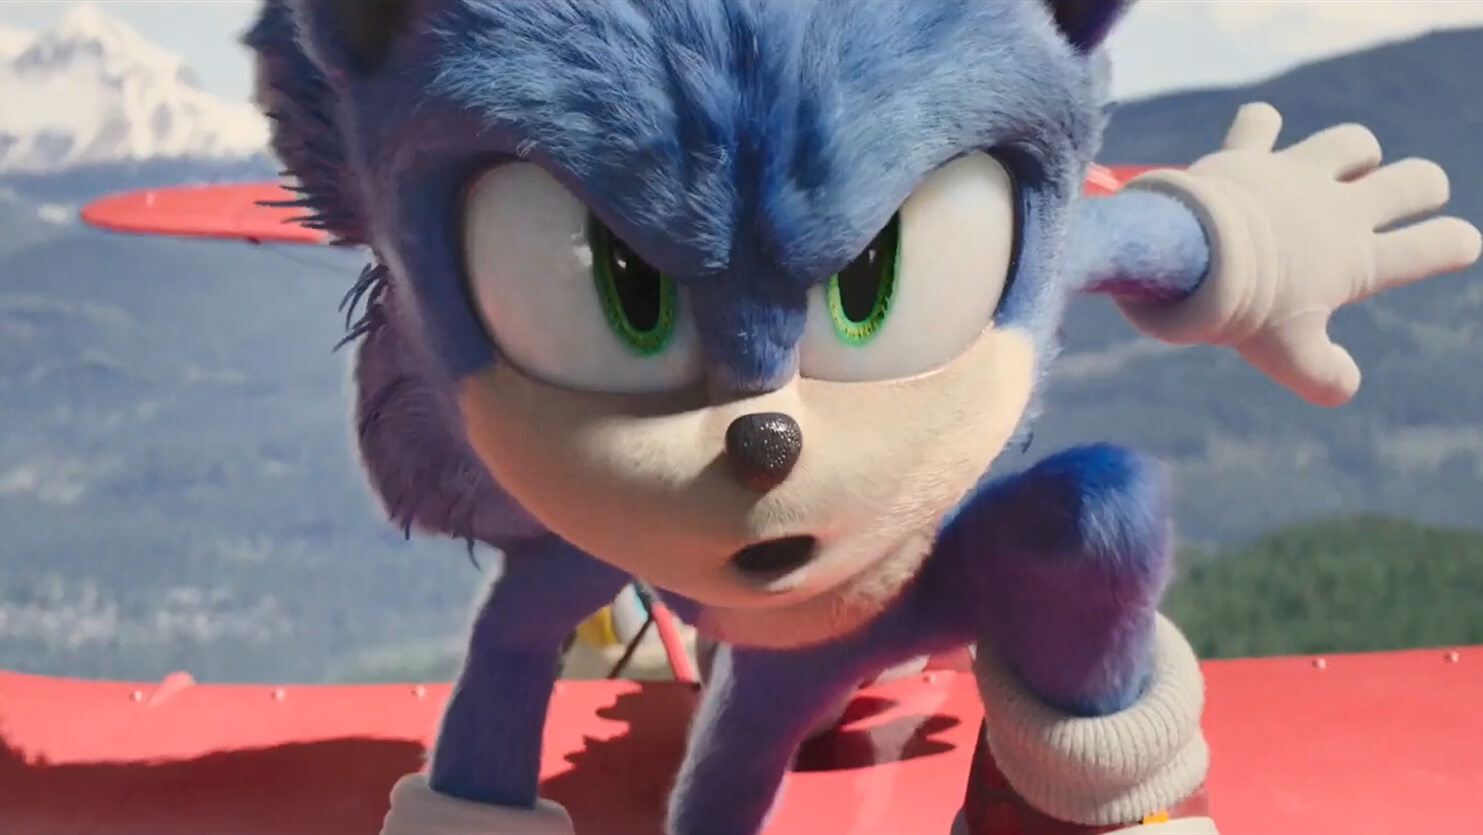 Game adaptation movie Sonic the Hedgehog 2 first exposure trailer-1